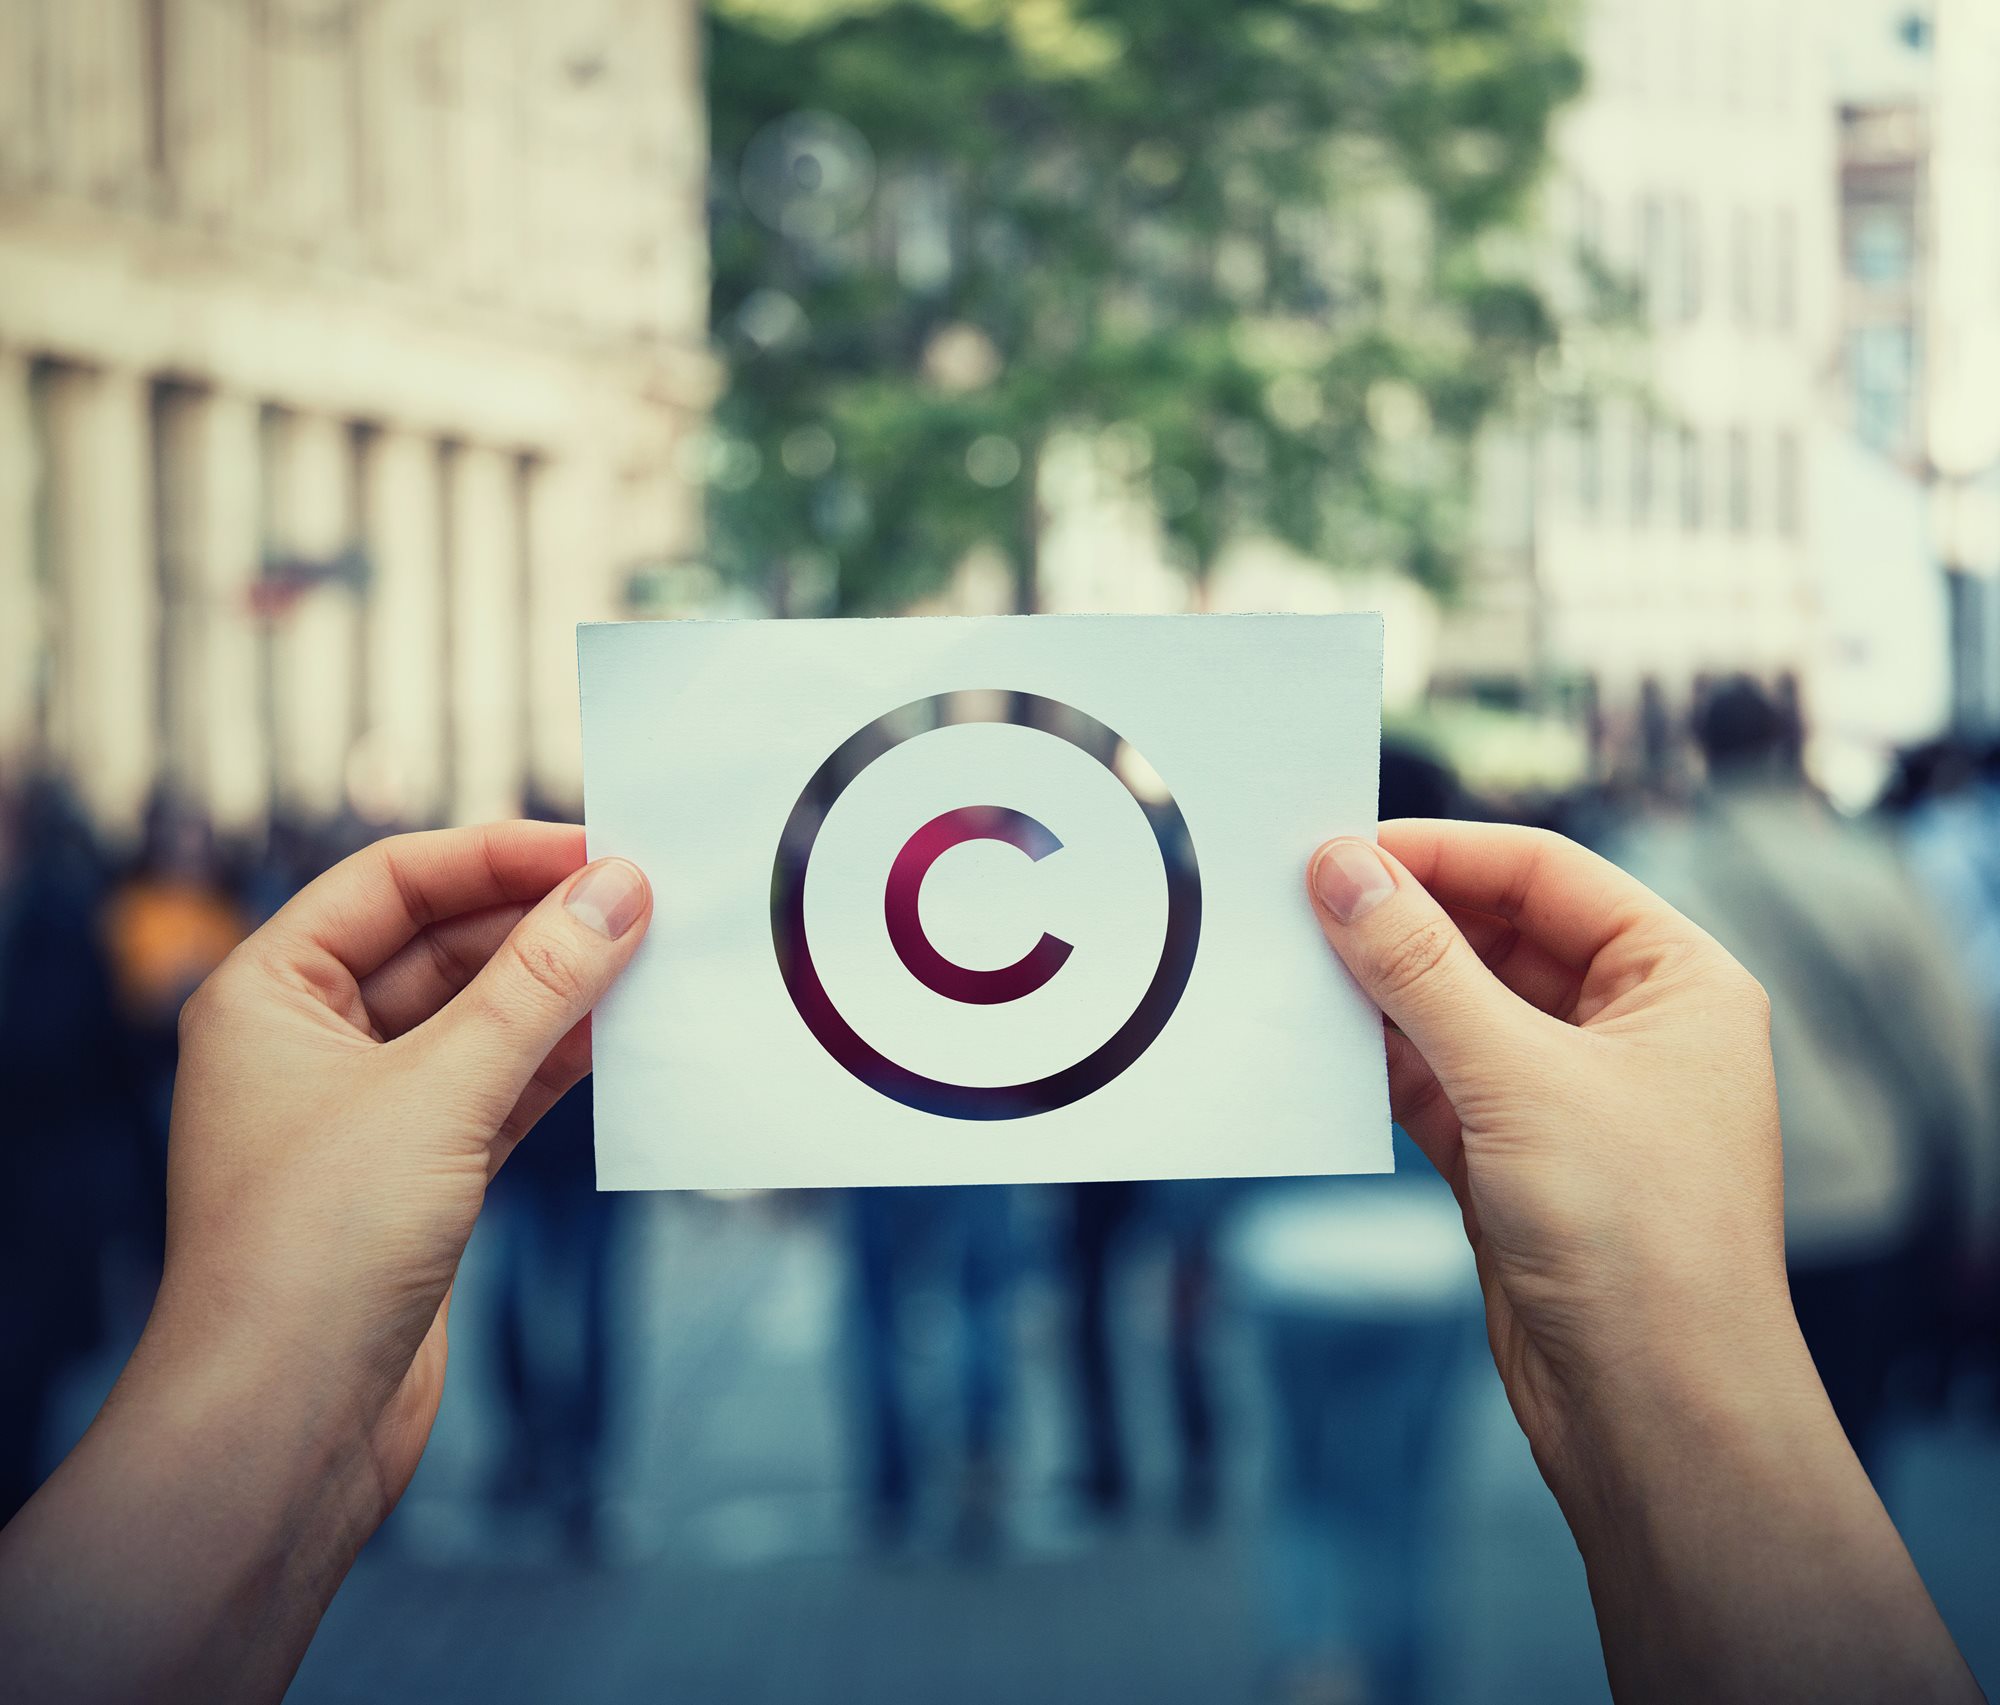 How would you improve copyright and piracy claims?